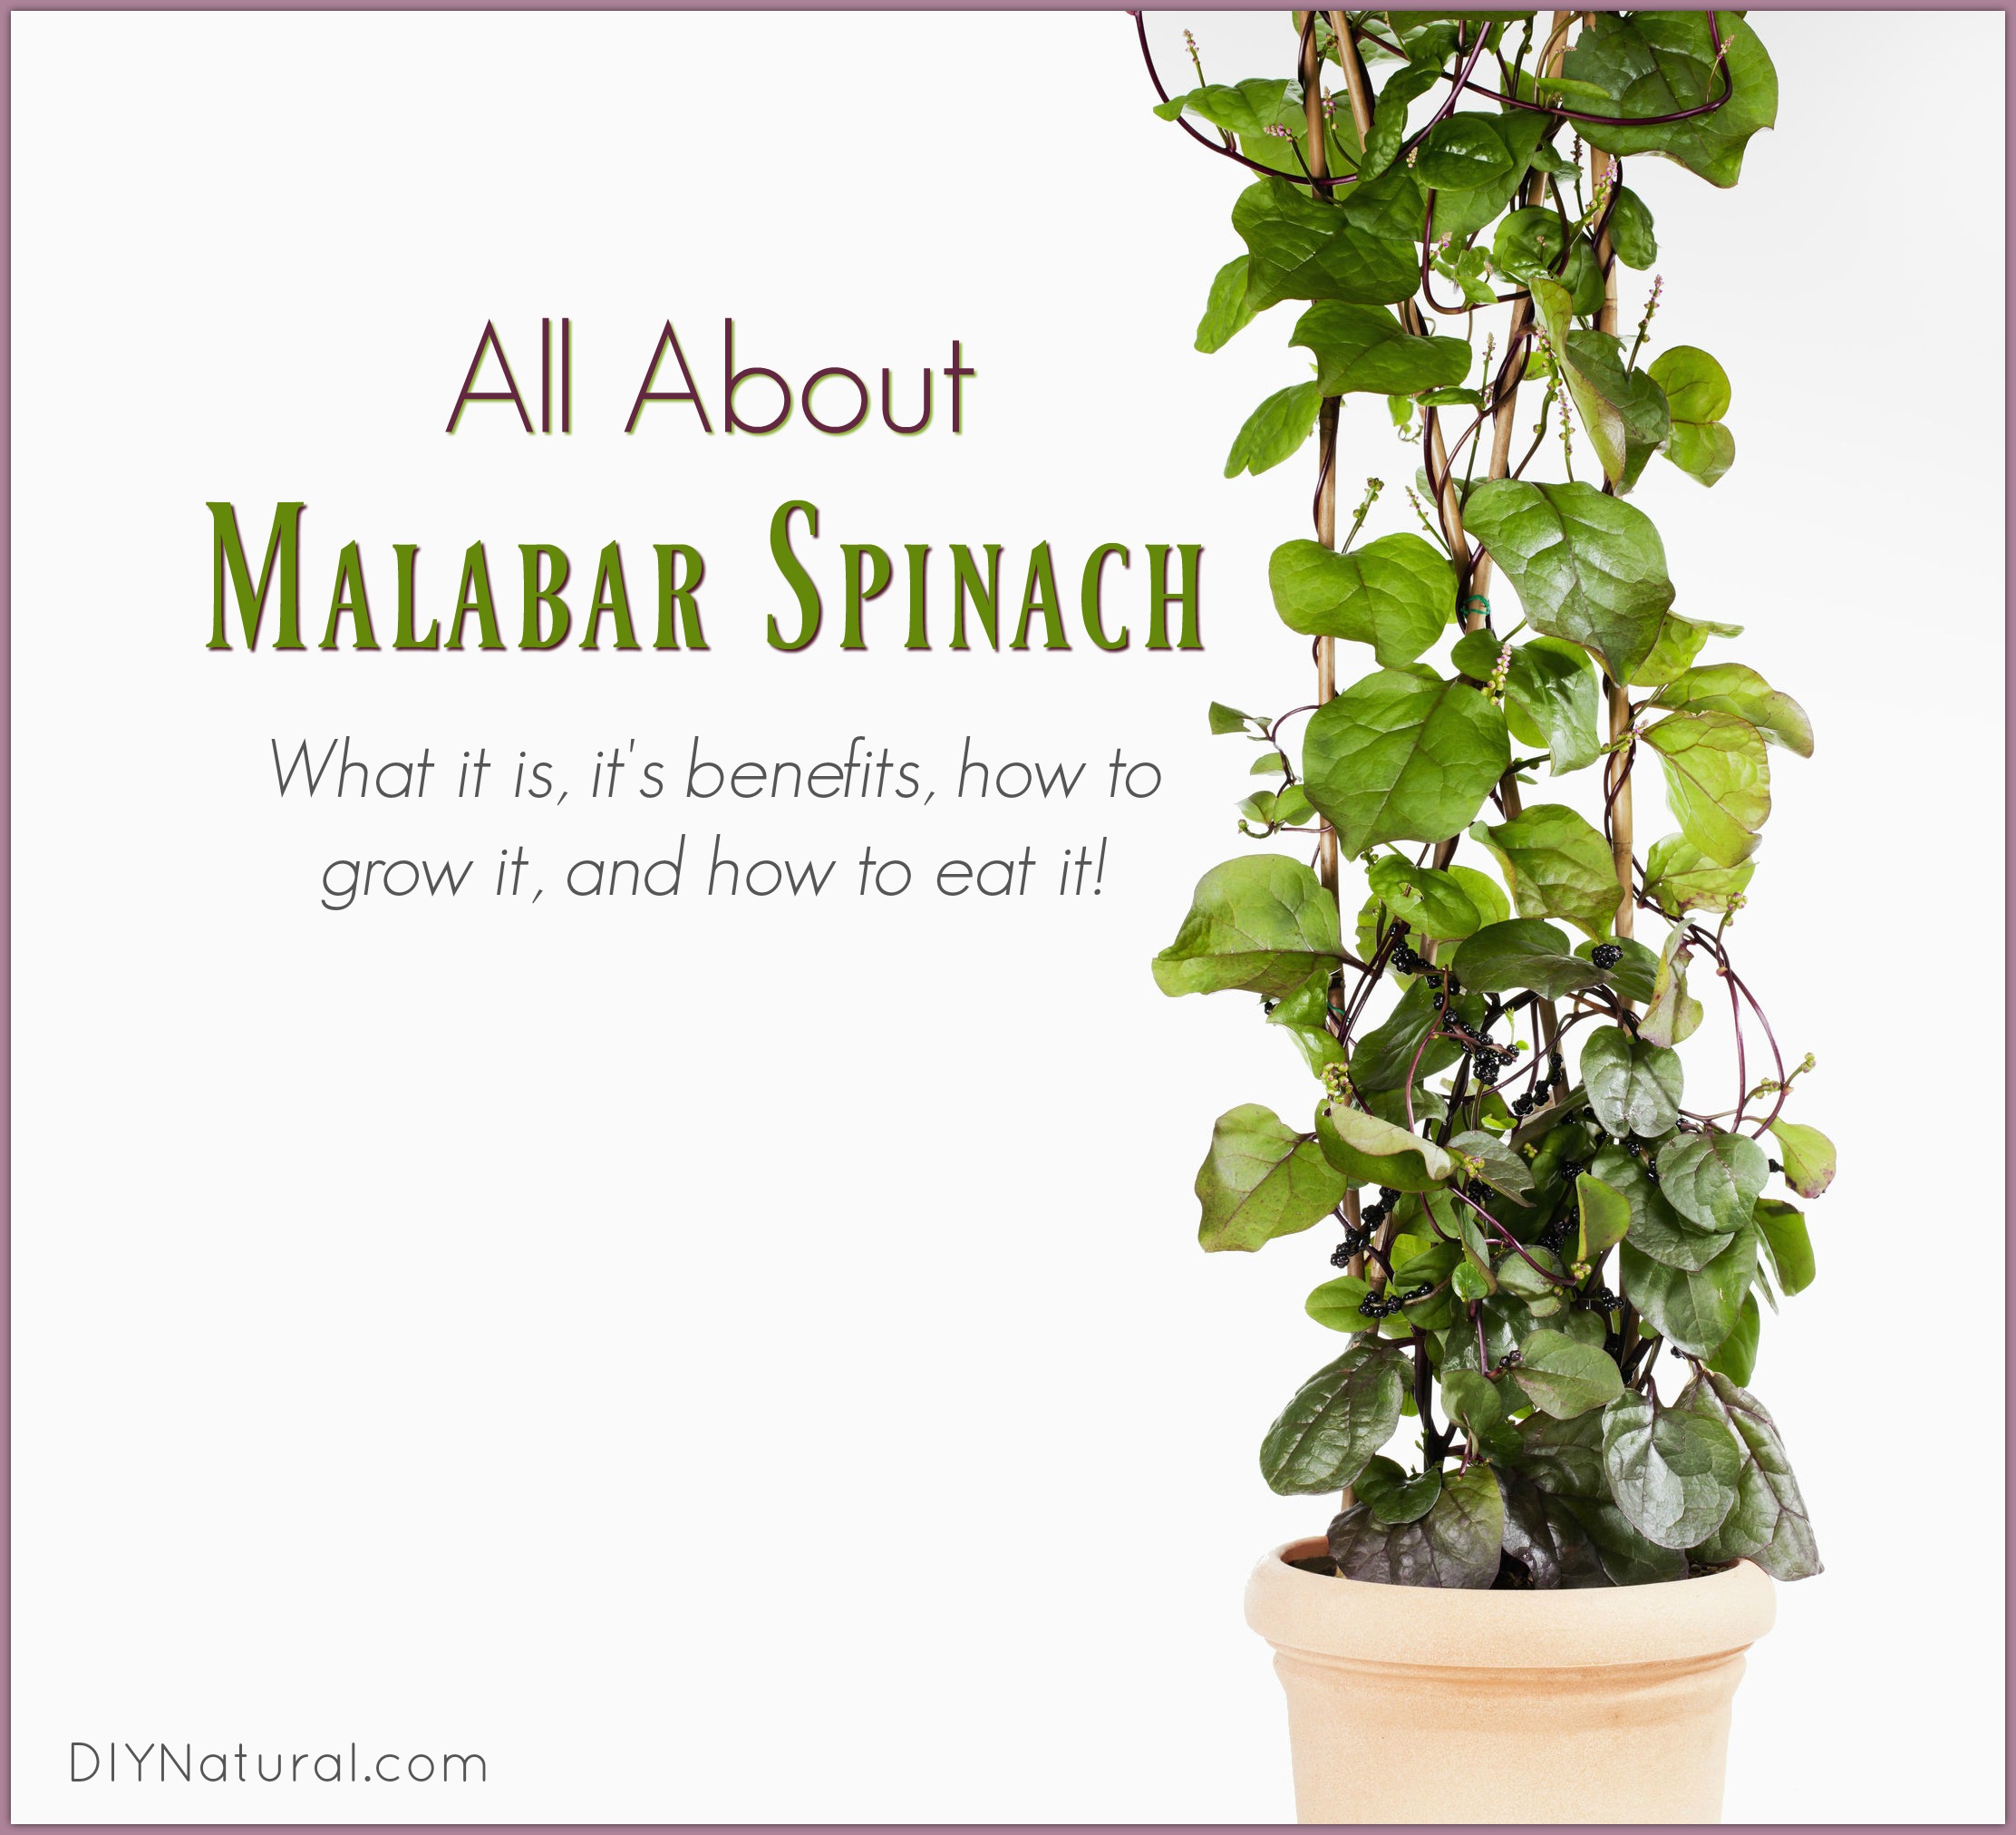 malabar spinach: what it is, benefits, and how to grow & eat it